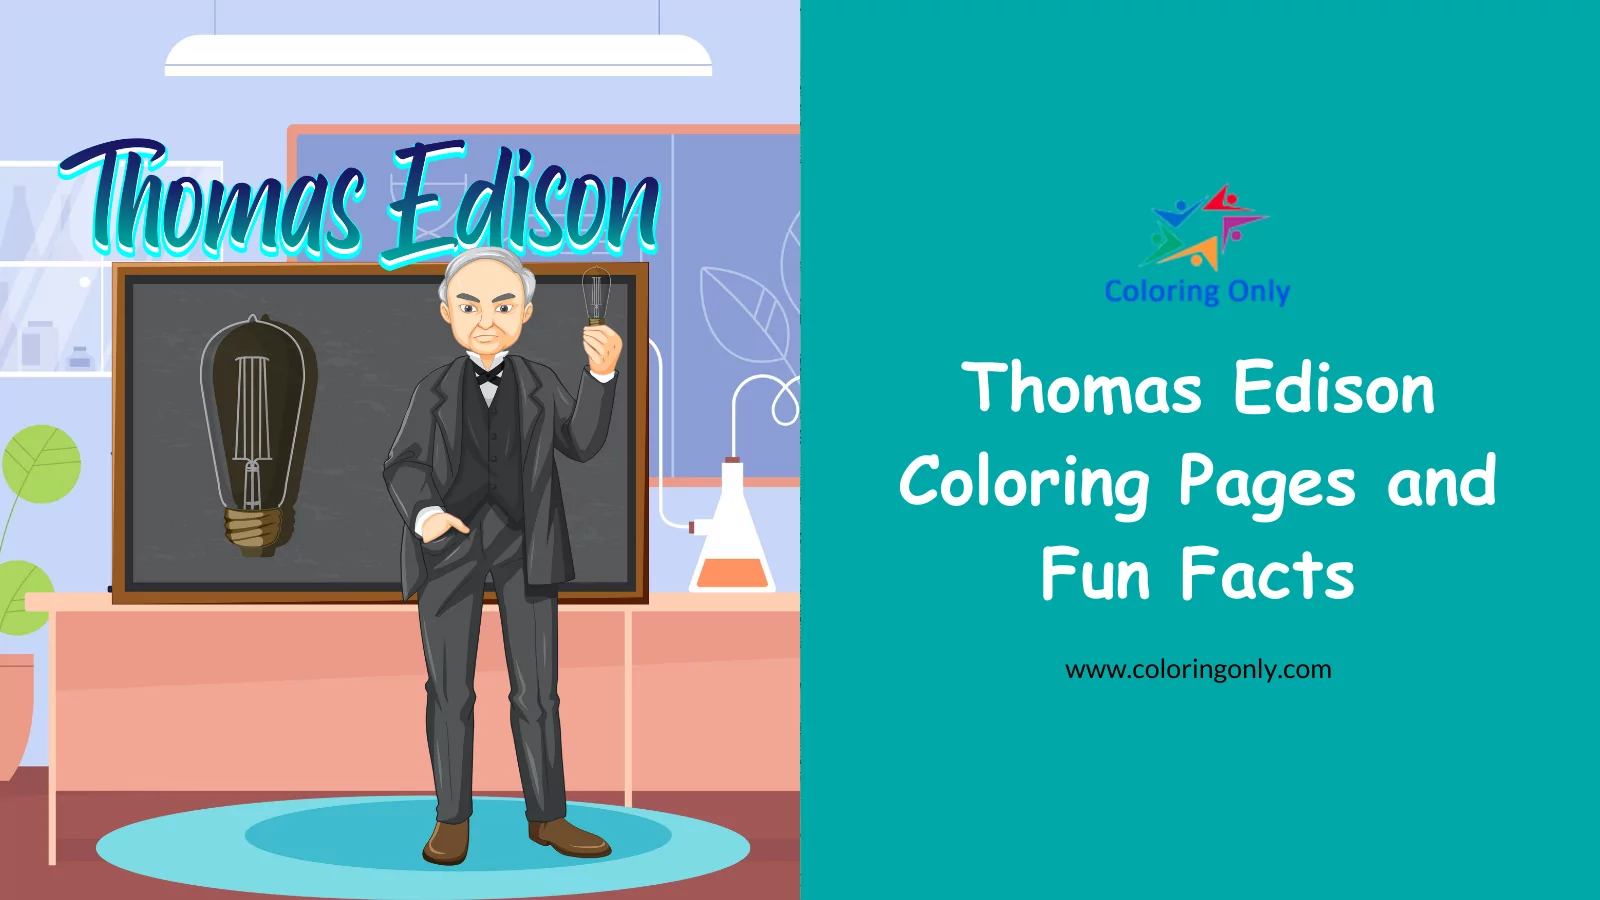 Thomas Edison Coloring Pages and Fun Facts